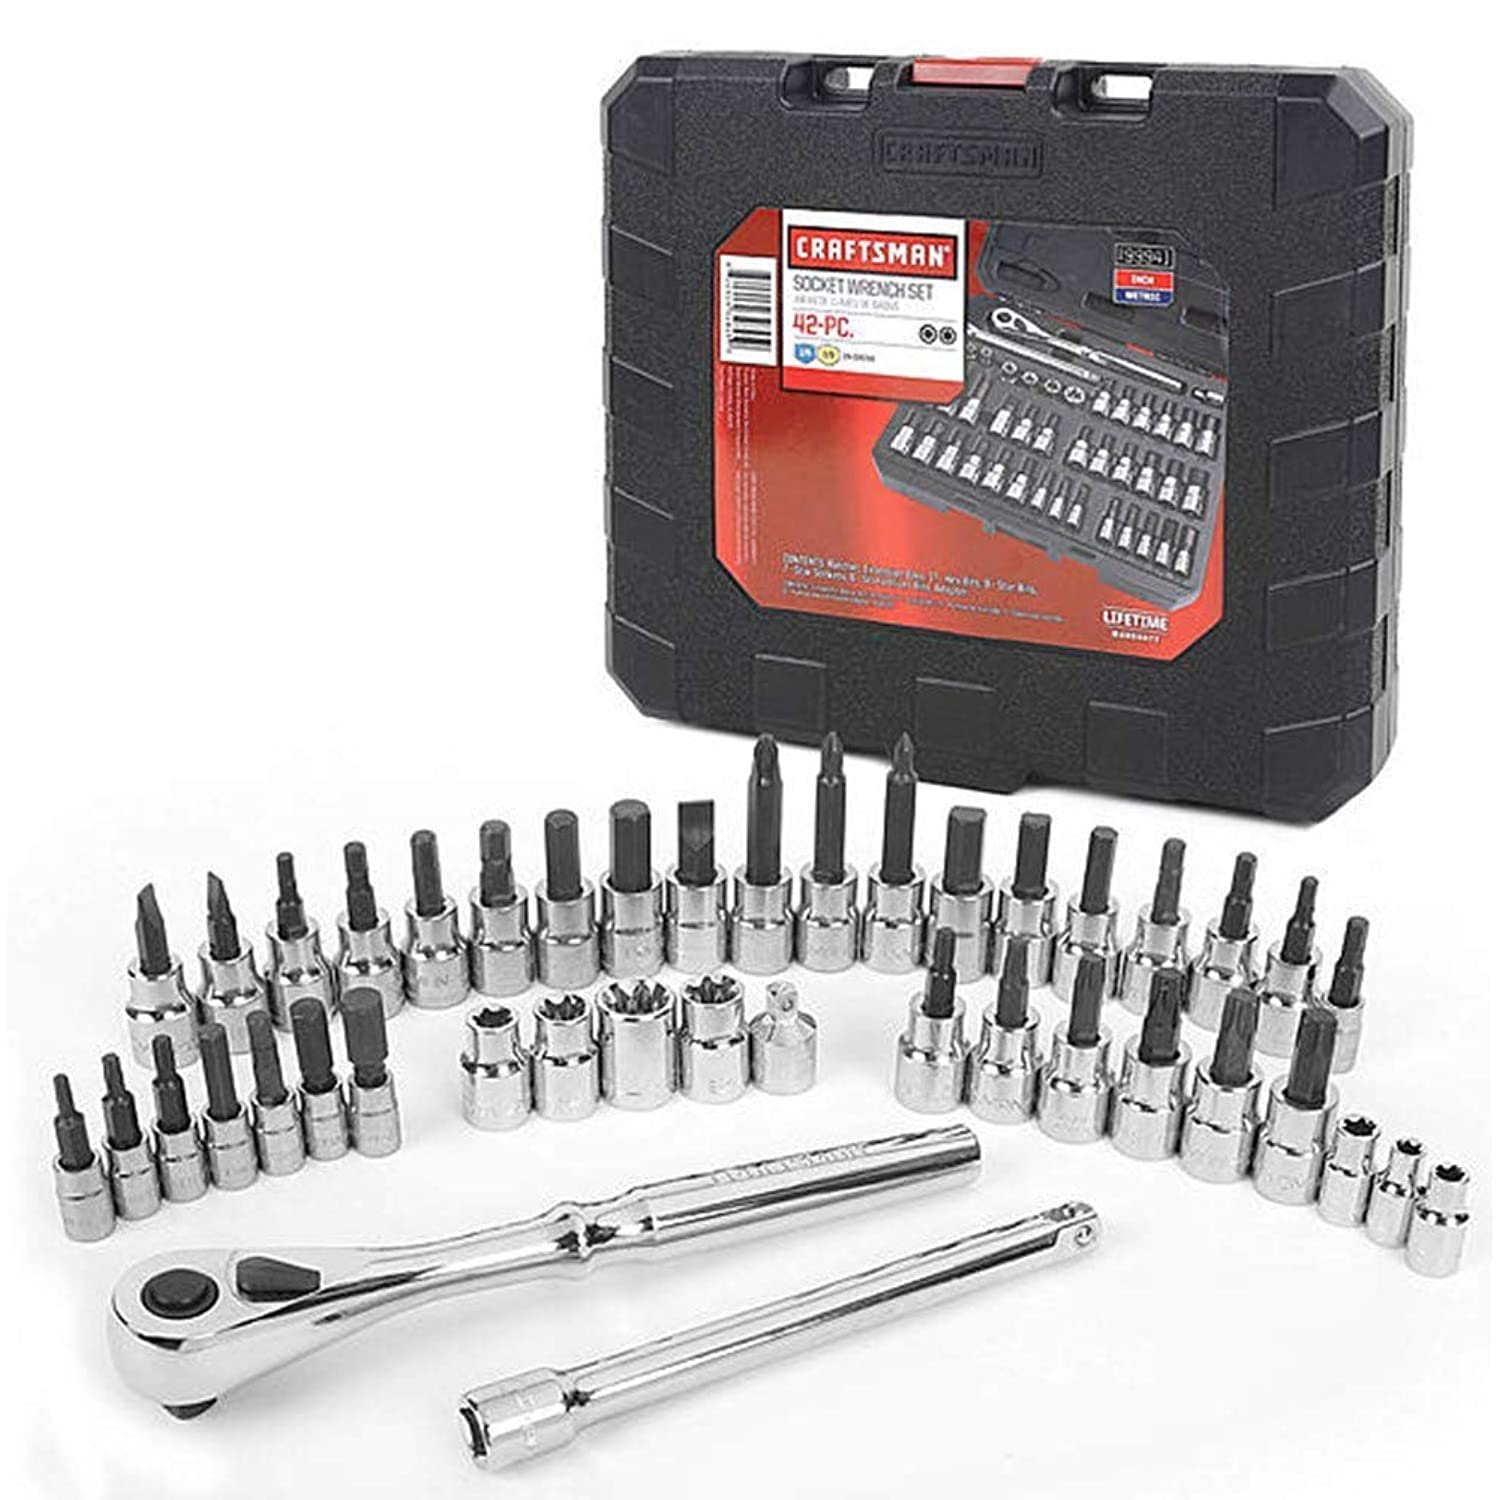 Craftsman 99941 42 Piece 1/4 and 3/8-inch Drive Bit and Torx Bit Socket Wrench Set